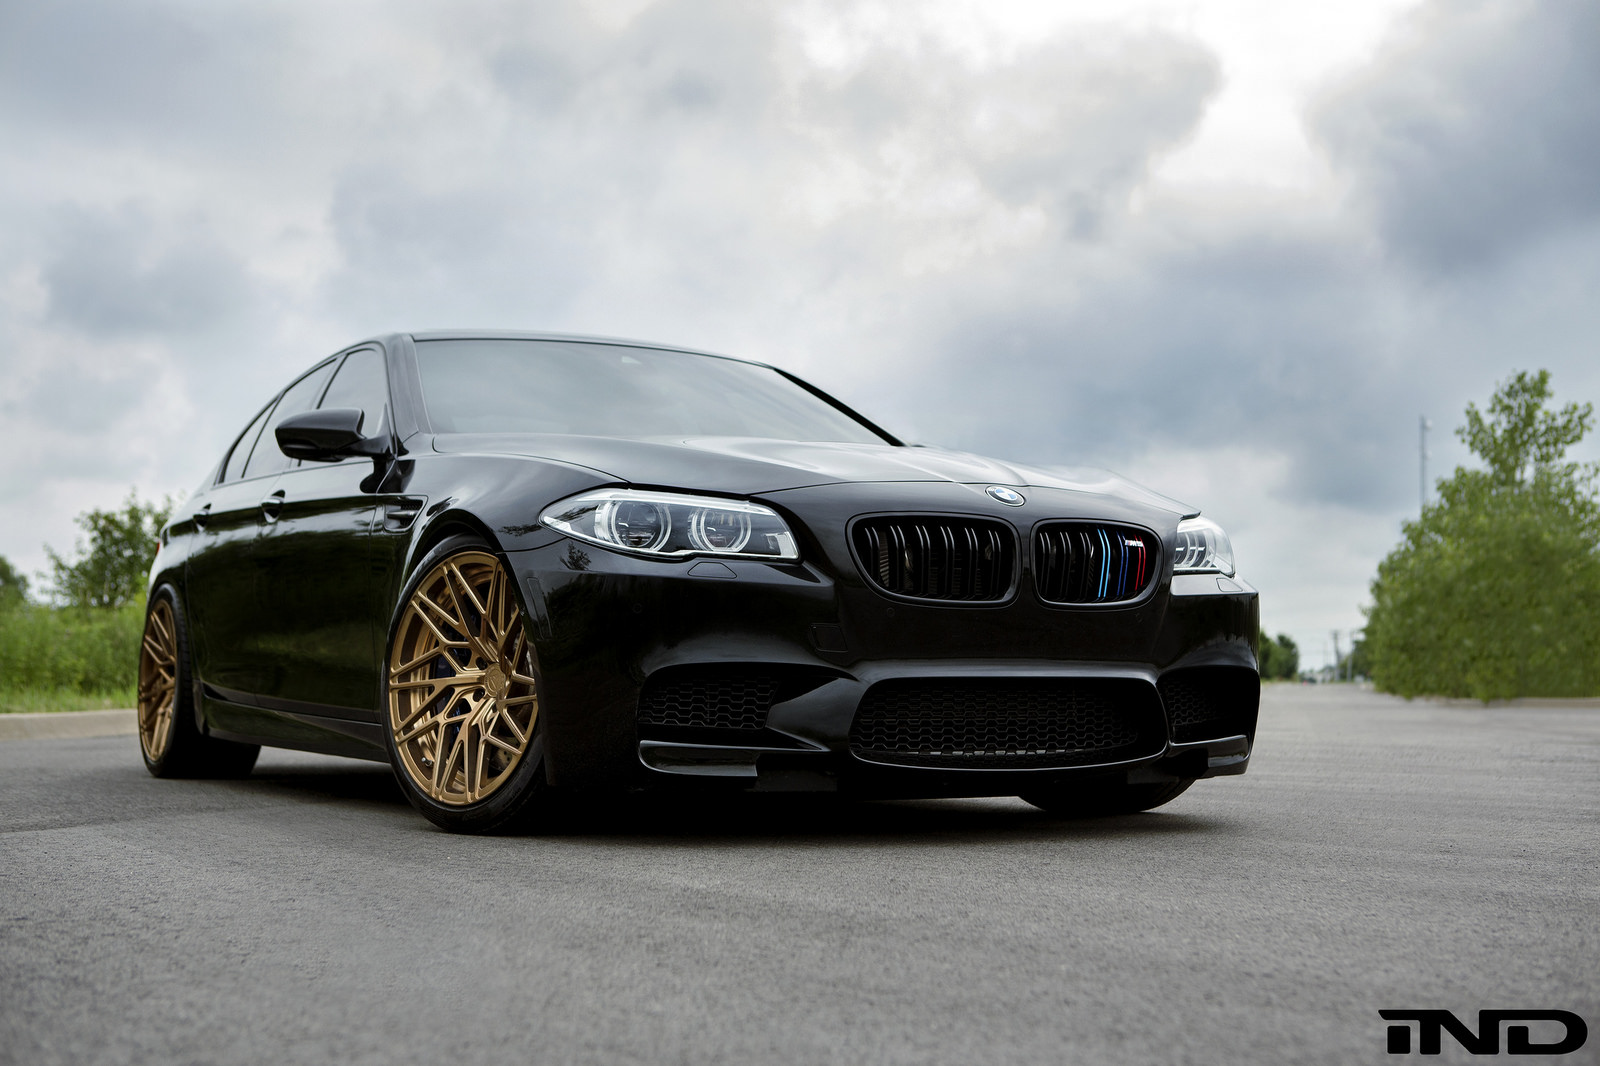 BMW M5 Looks Smashing with the Carbon Aero Kit from iND Distribution